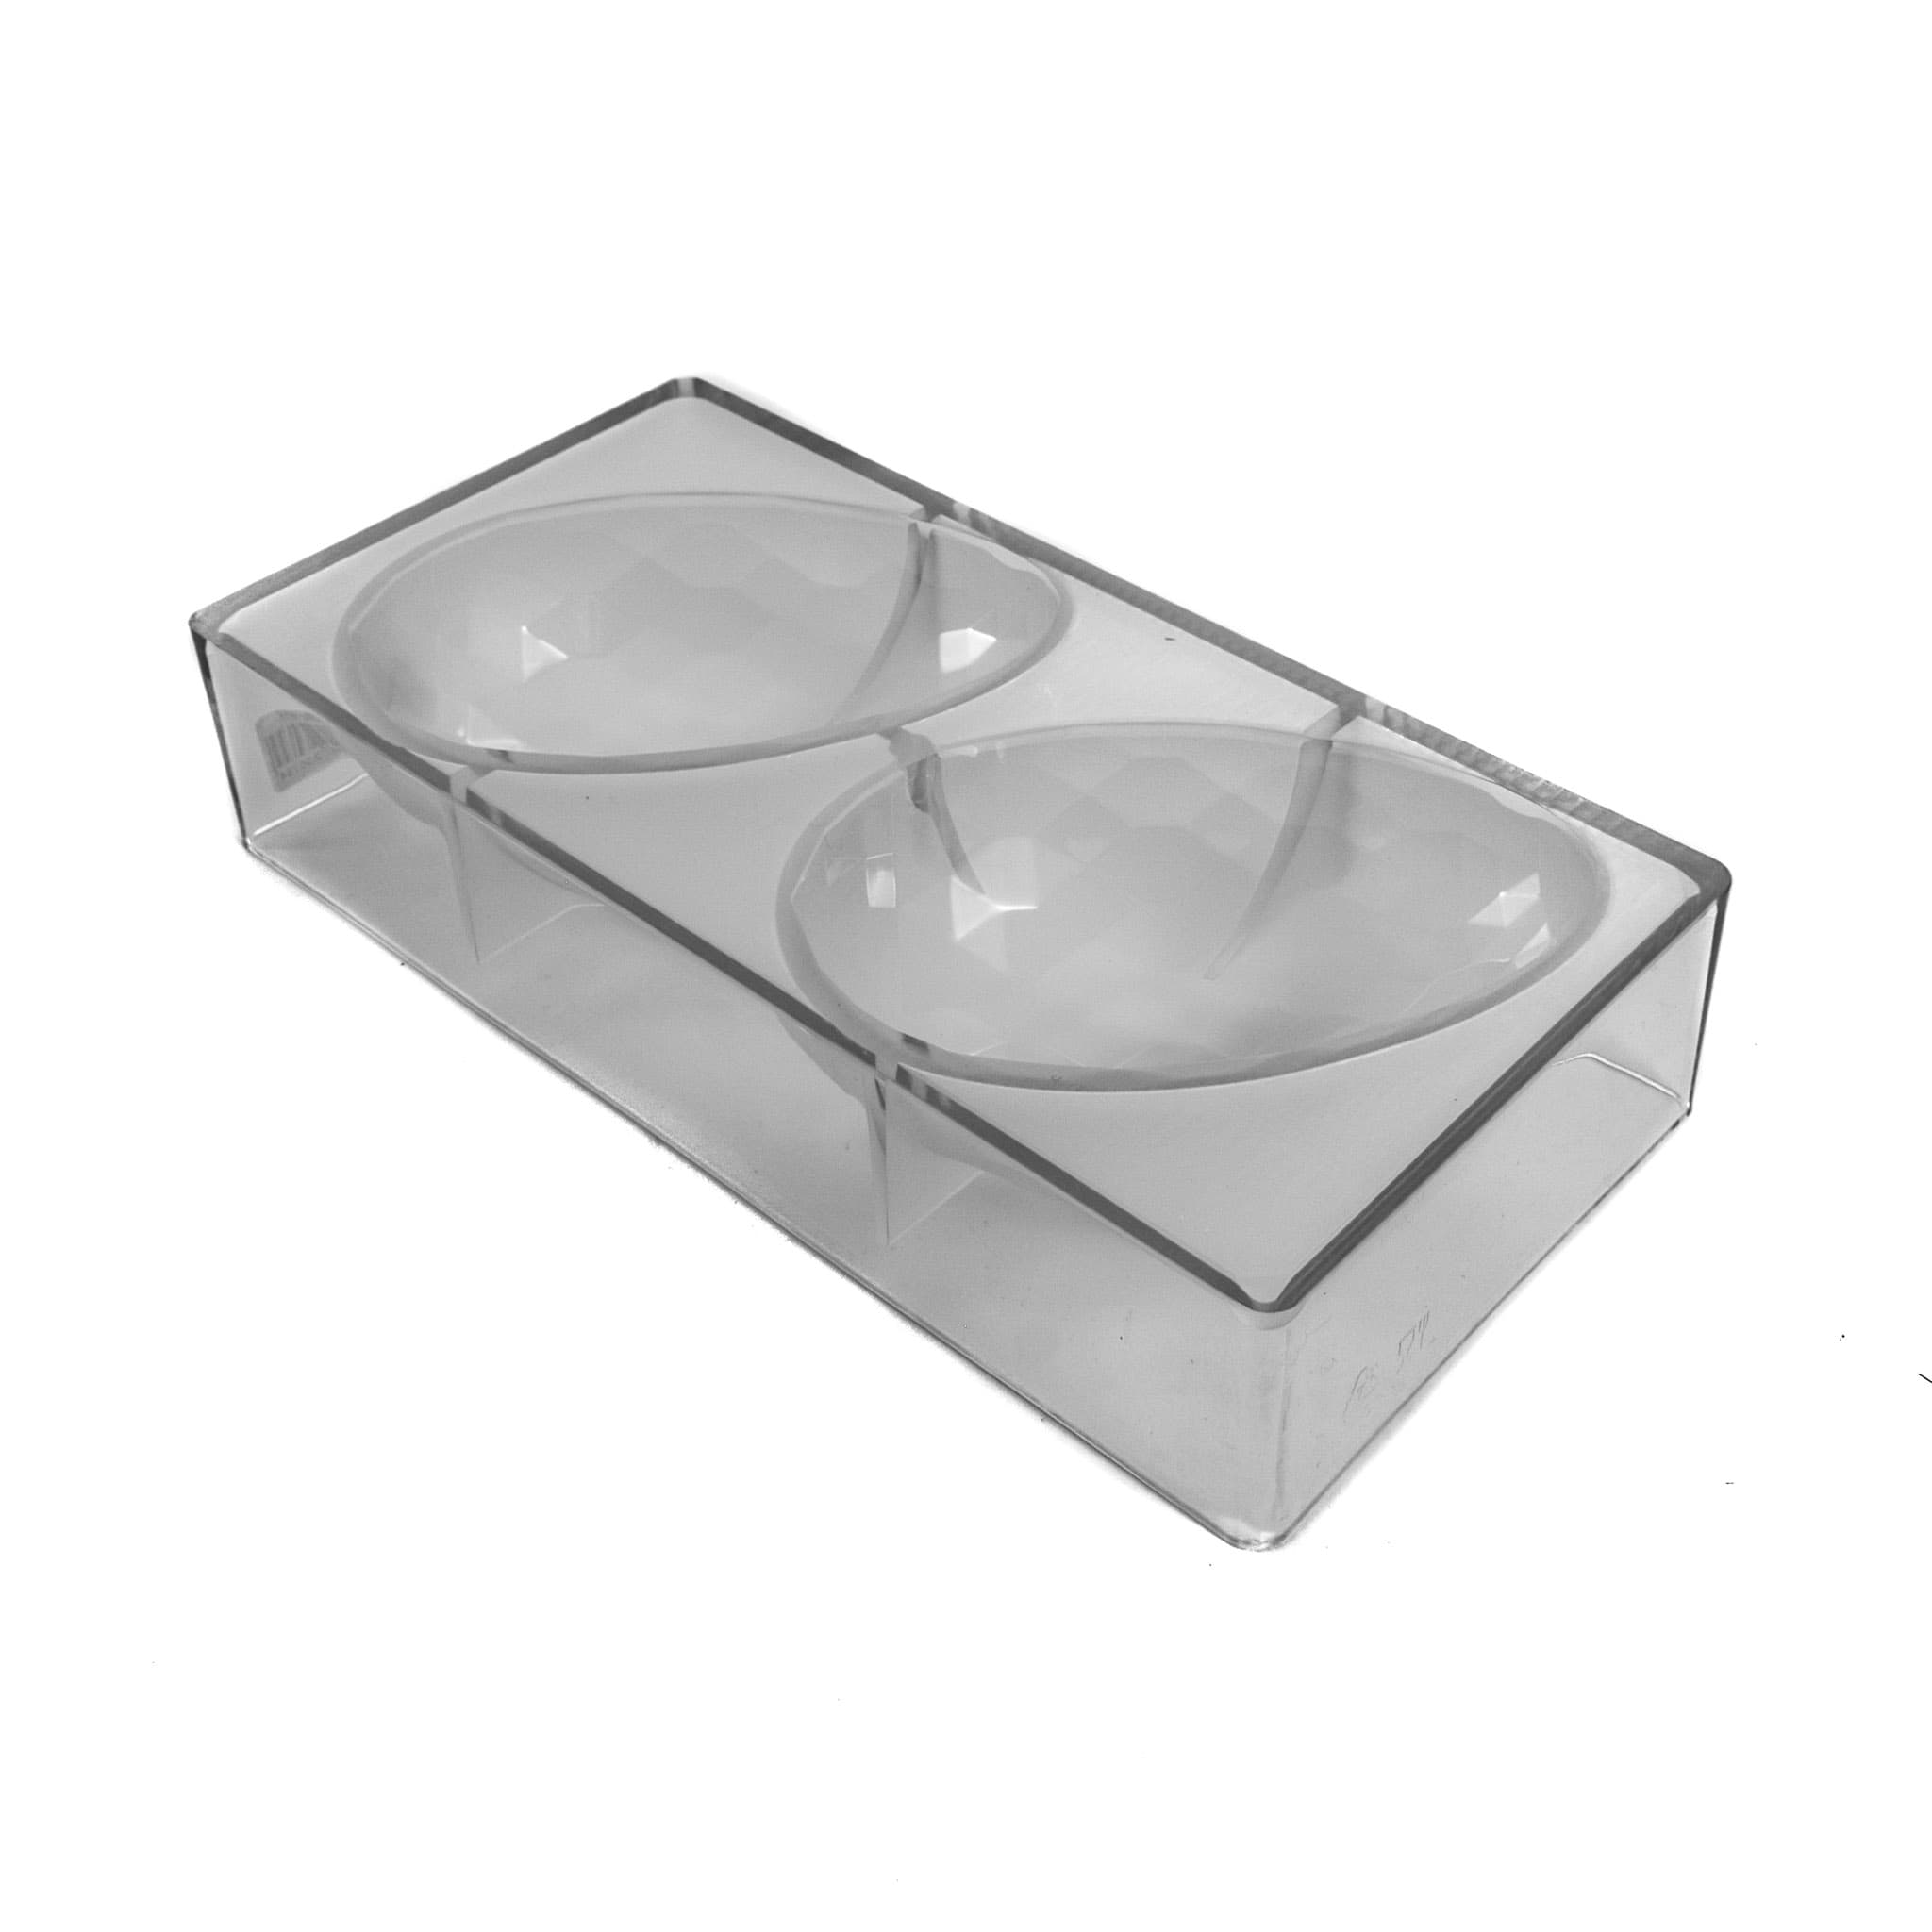 Polycarbonate Diamond Chocolate Easter Egg Mould Large